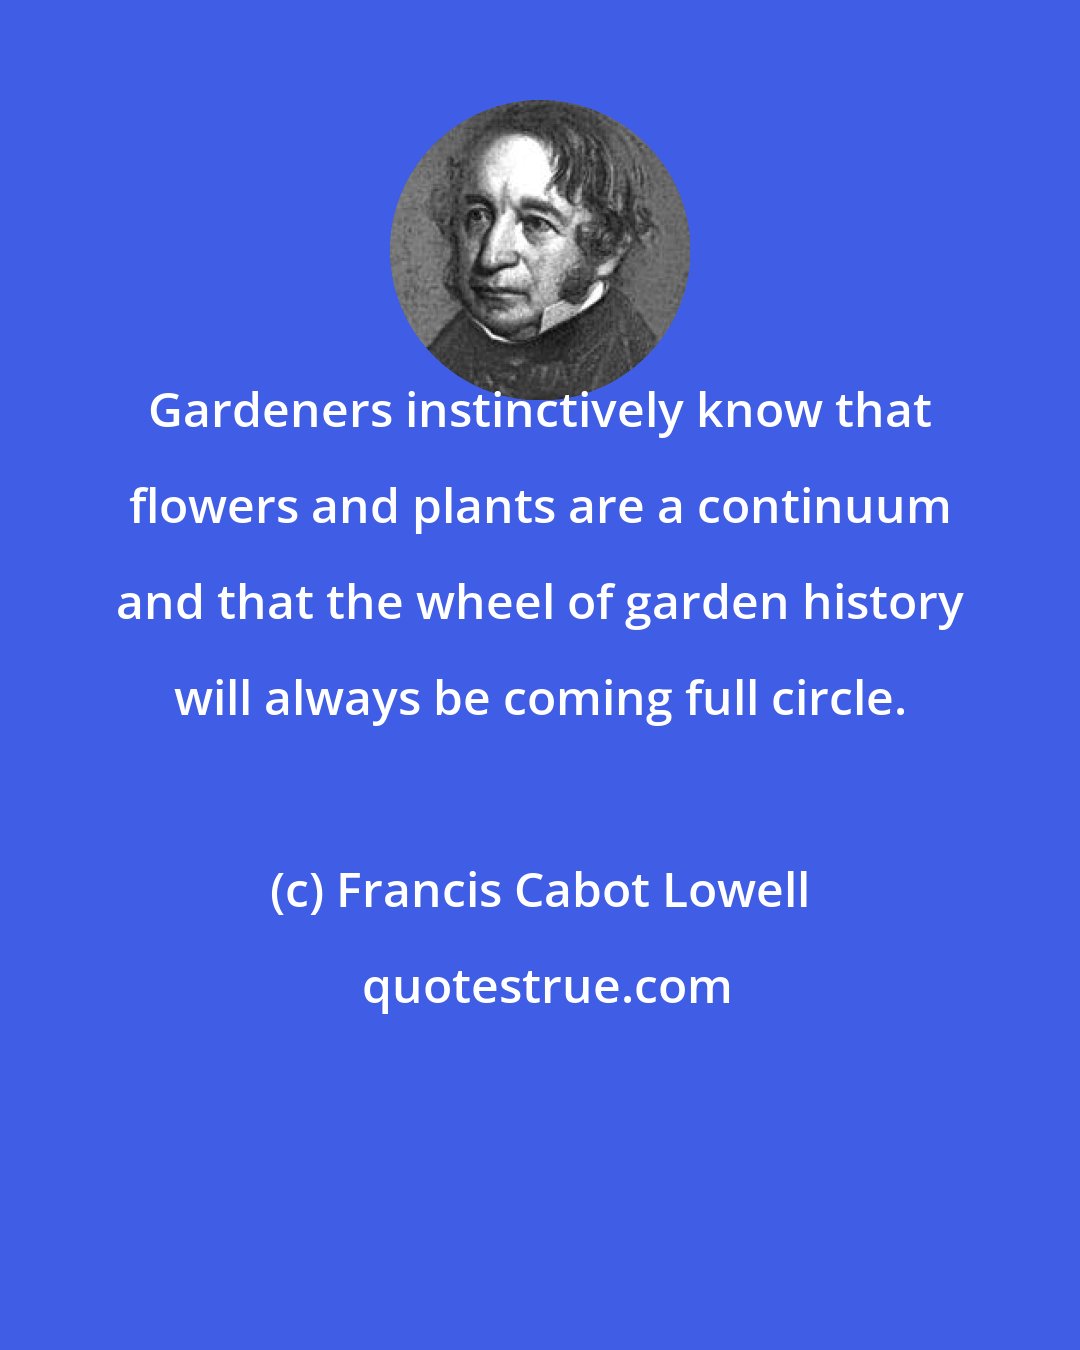 Francis Cabot Lowell: Gardeners instinctively know that flowers and plants are a continuum and that the wheel of garden history will always be coming full circle.